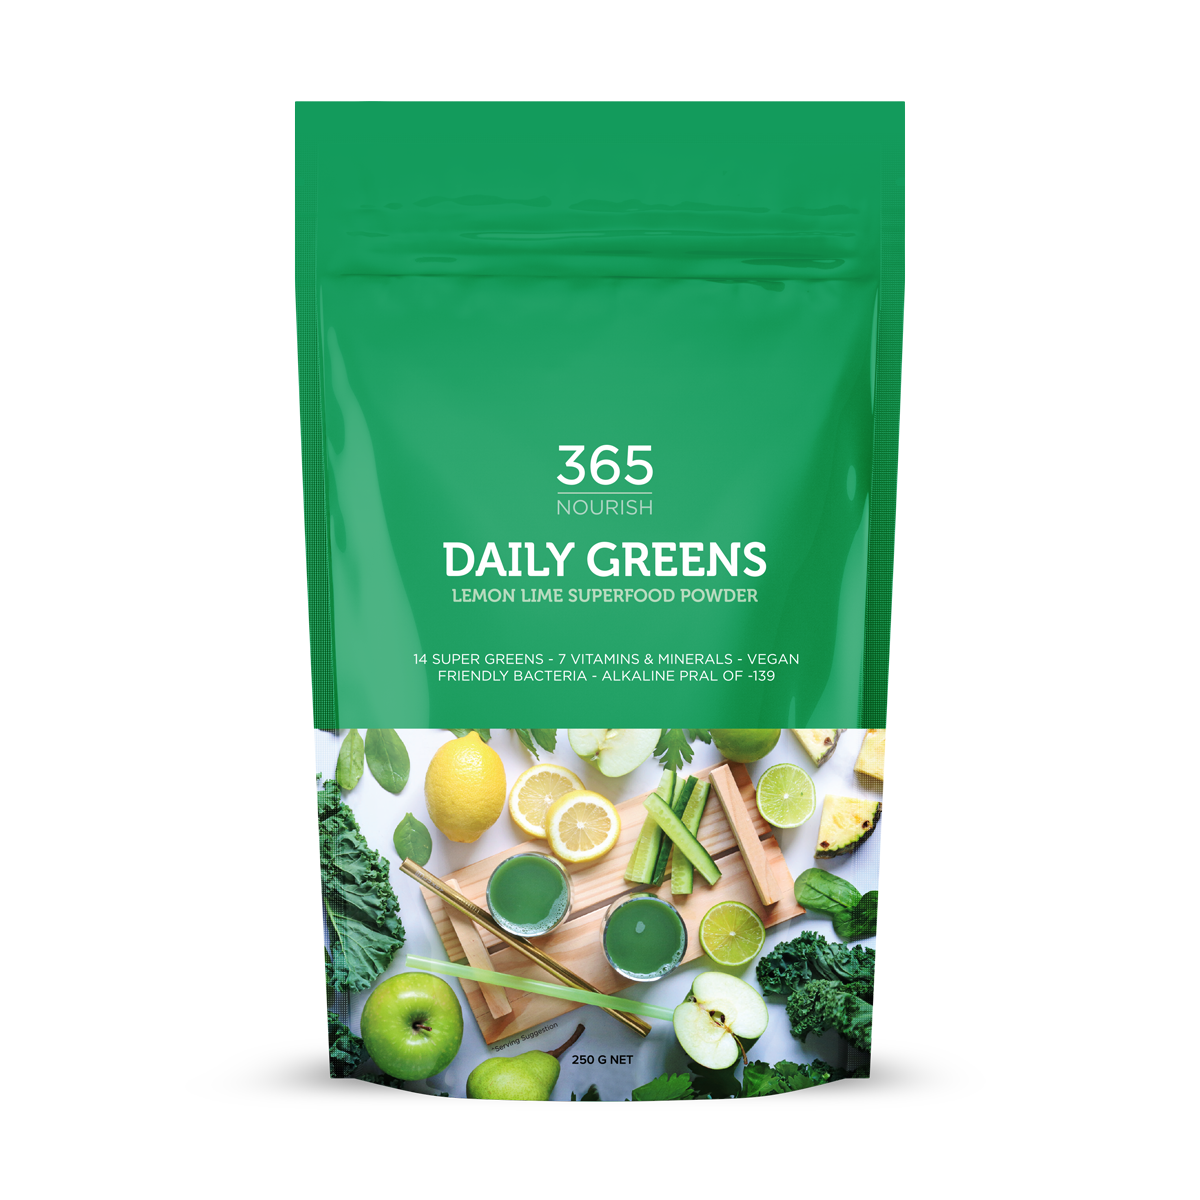 Daily Greens - 2 Delicious Flavours